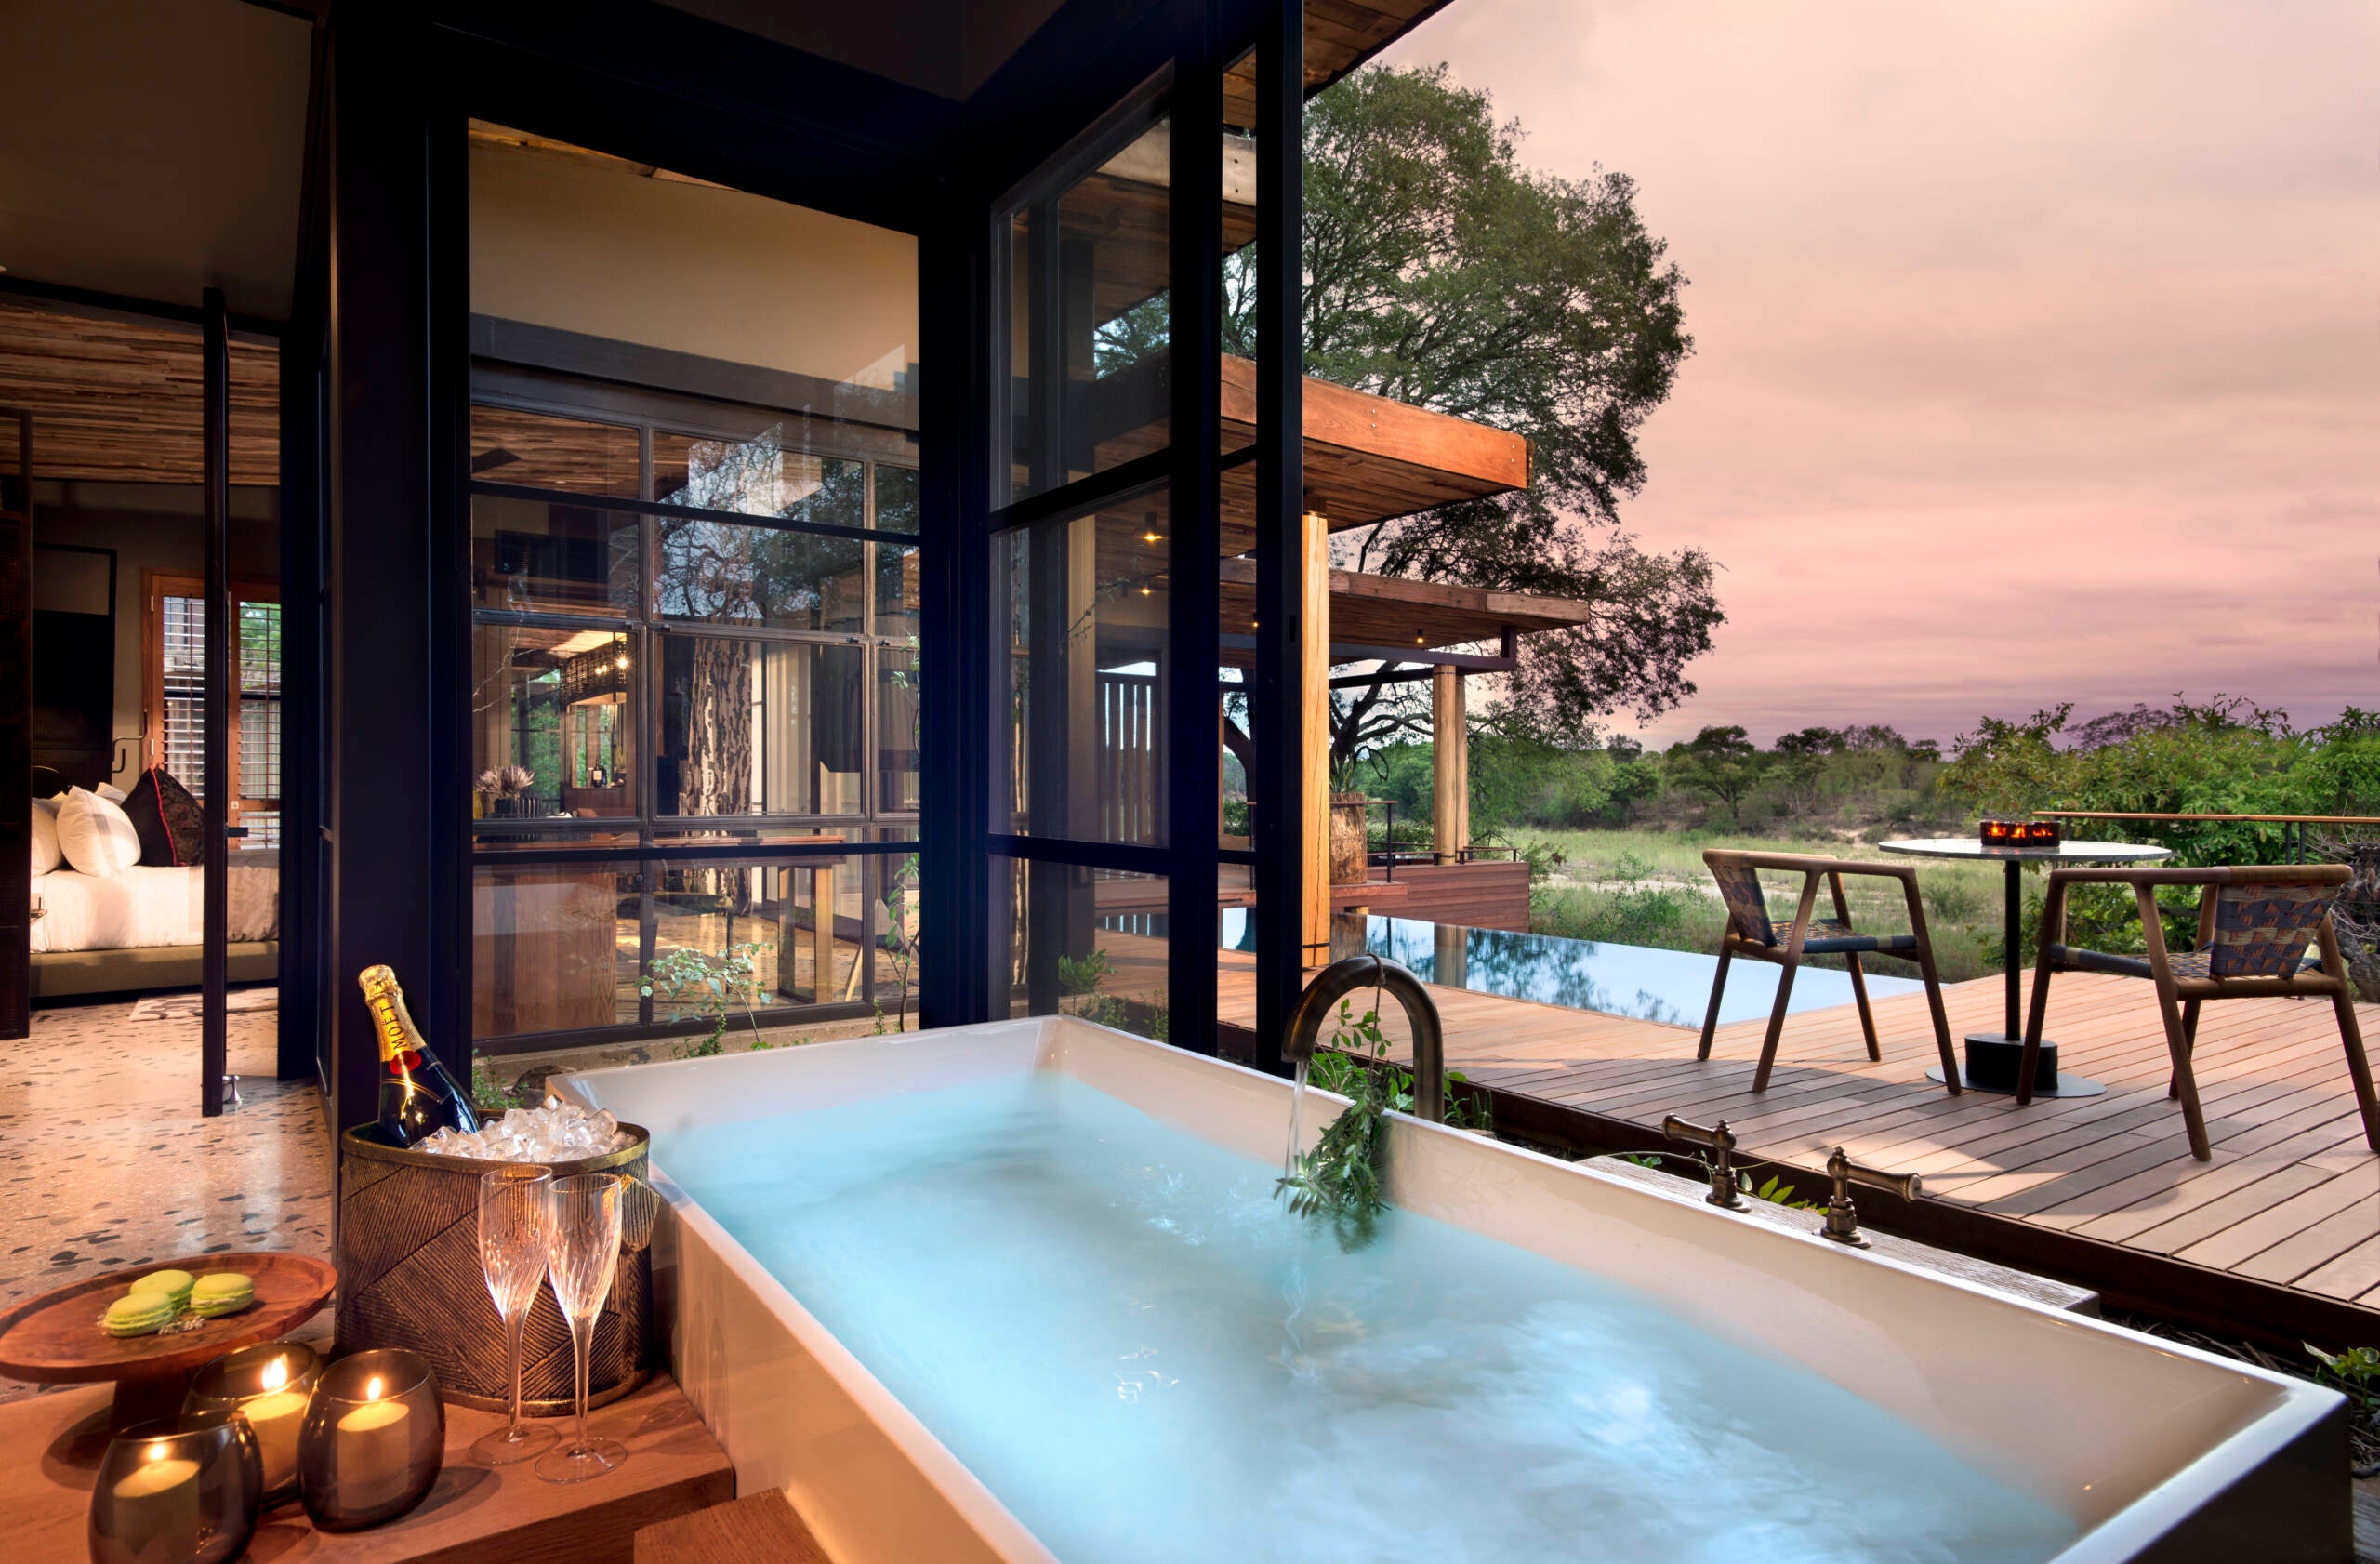 18 hotels you’ll want to book just for the incredible bathtub